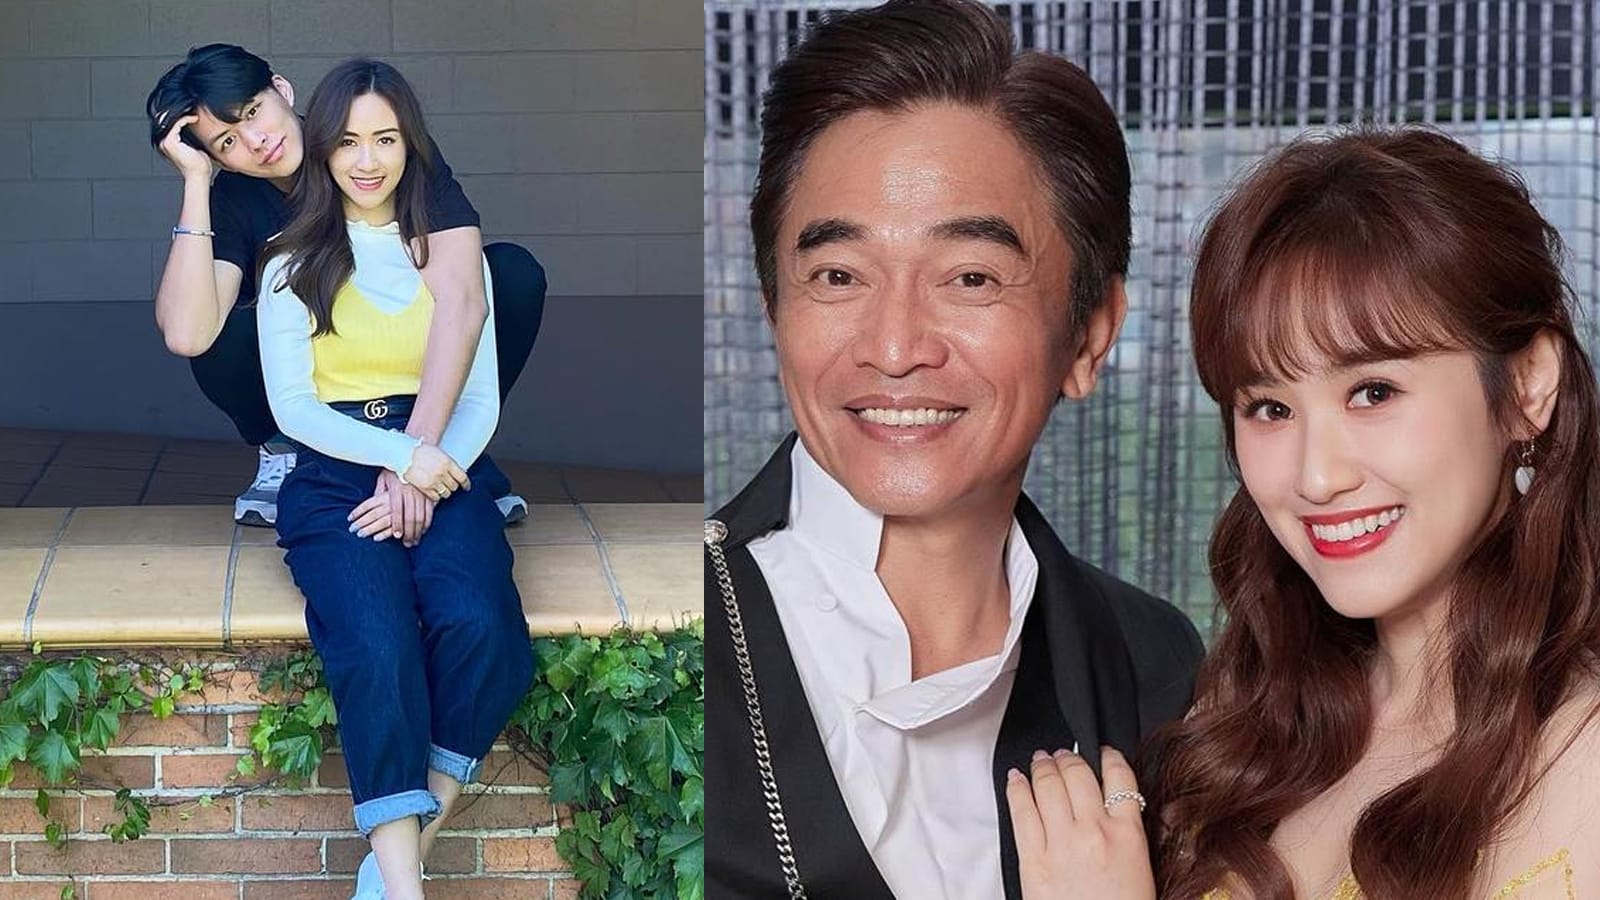 Jacky Wu’s Daughter Sandy Wu Says She Would “Throw Away” Her Kids If They Look Like Her Dad